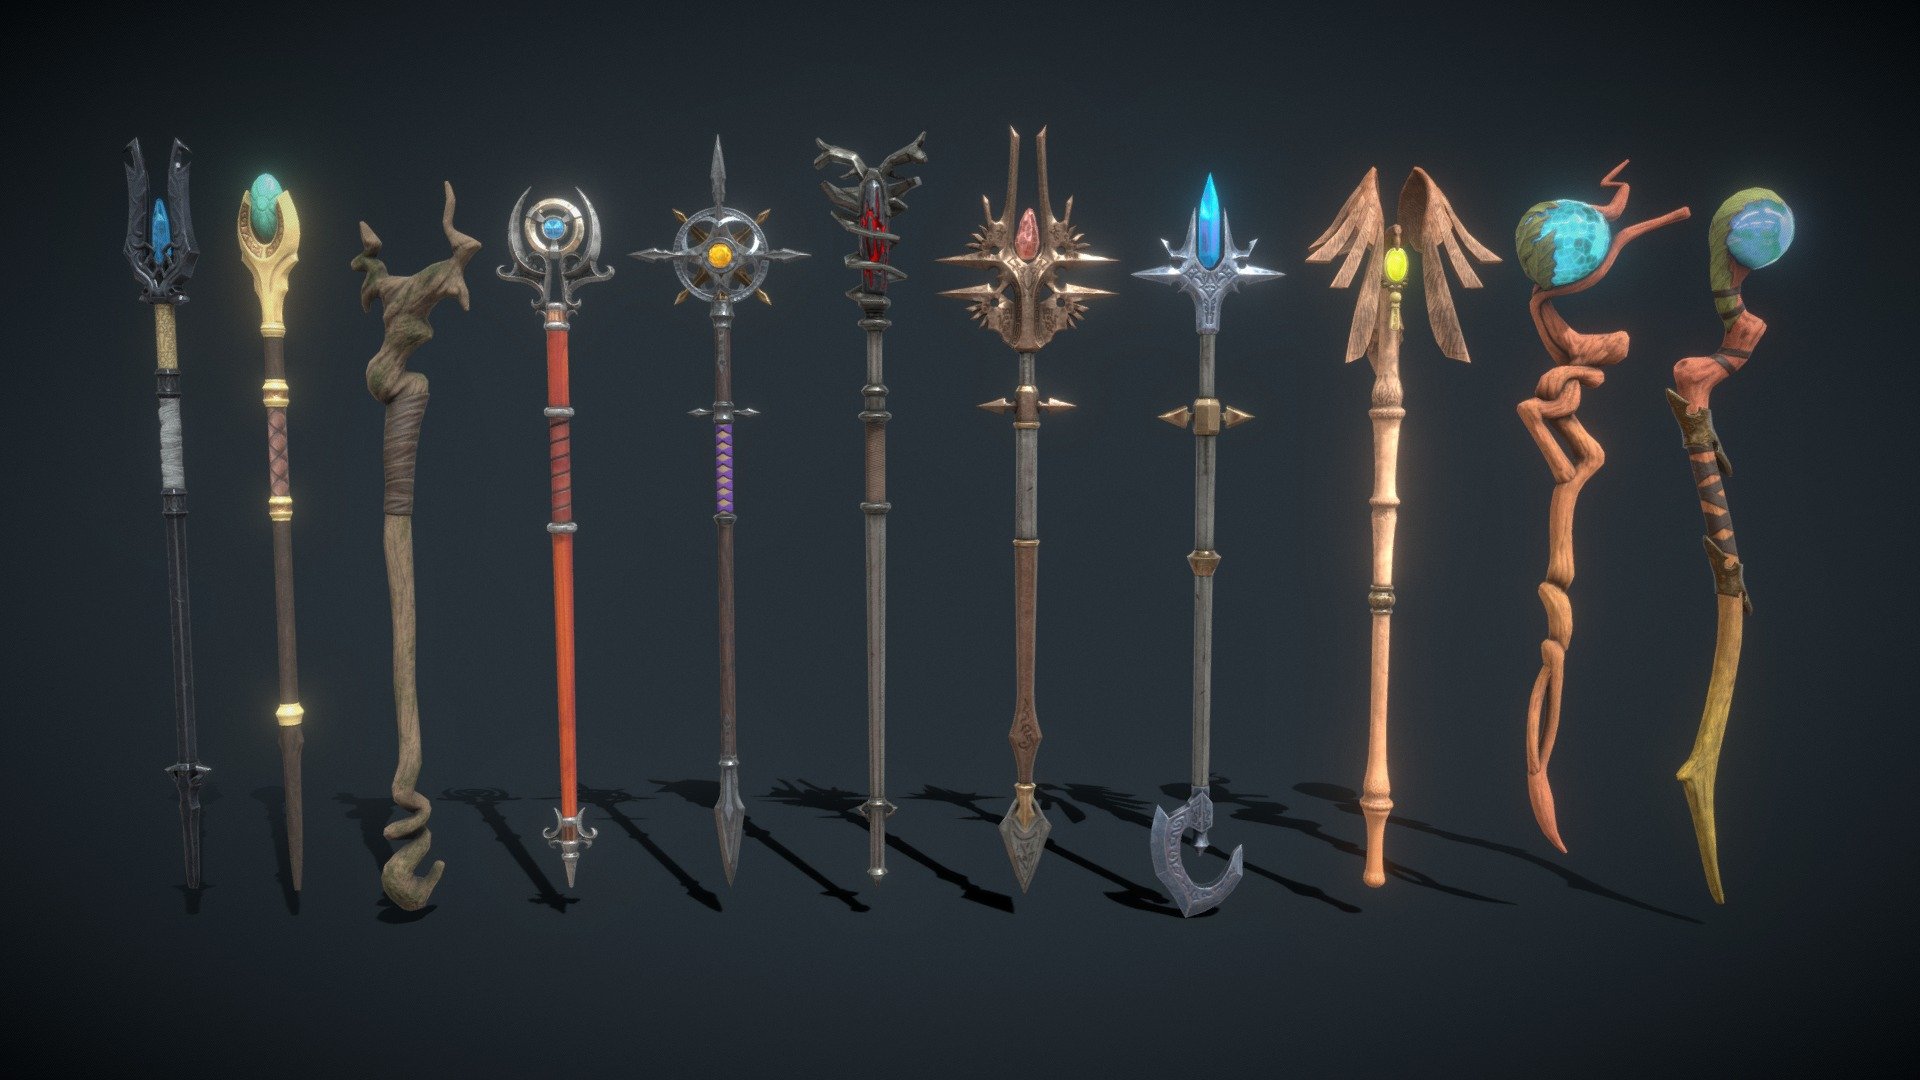 A set of quality staff models. Consists of 11 original objects. Each staff has a PBR texture with a resolution of 2048x2048.

Total polygons (triangles) 32346

SM_Staff_indian_set04_01 - 3162

SM_Staff_indian_set04_02 - 2244

SM_Staff_indian_set04_03 - 1460

SM_Staff_indian_set04_04 - 3284

SM_Staff_indian_set04_05 - 4898

SM_Staff_indian_set04_06 - 2188

SM_Staff_indian_set04_07 - 3520

SM_Staff_indian_set04_08 - 2220

SM_Staff_indian_set04_09 - 5618

SM_Staff_indian_set04_10 - 1924

SM_Staff_indian_set04_11 - 1828

Archives with textures contain:

PNG textures - base color, metallic, normal, roughness

Texturing Unity (Metallic Smoothness) - AlbedoTransparency, MetallicSmoothness, Normal

Texturing Unreal Engine - BaseColor, Normal, OcclusionRoughnessMetallic - Fantasy Staff Set 05 - 3D model by zilbeerman 3d model